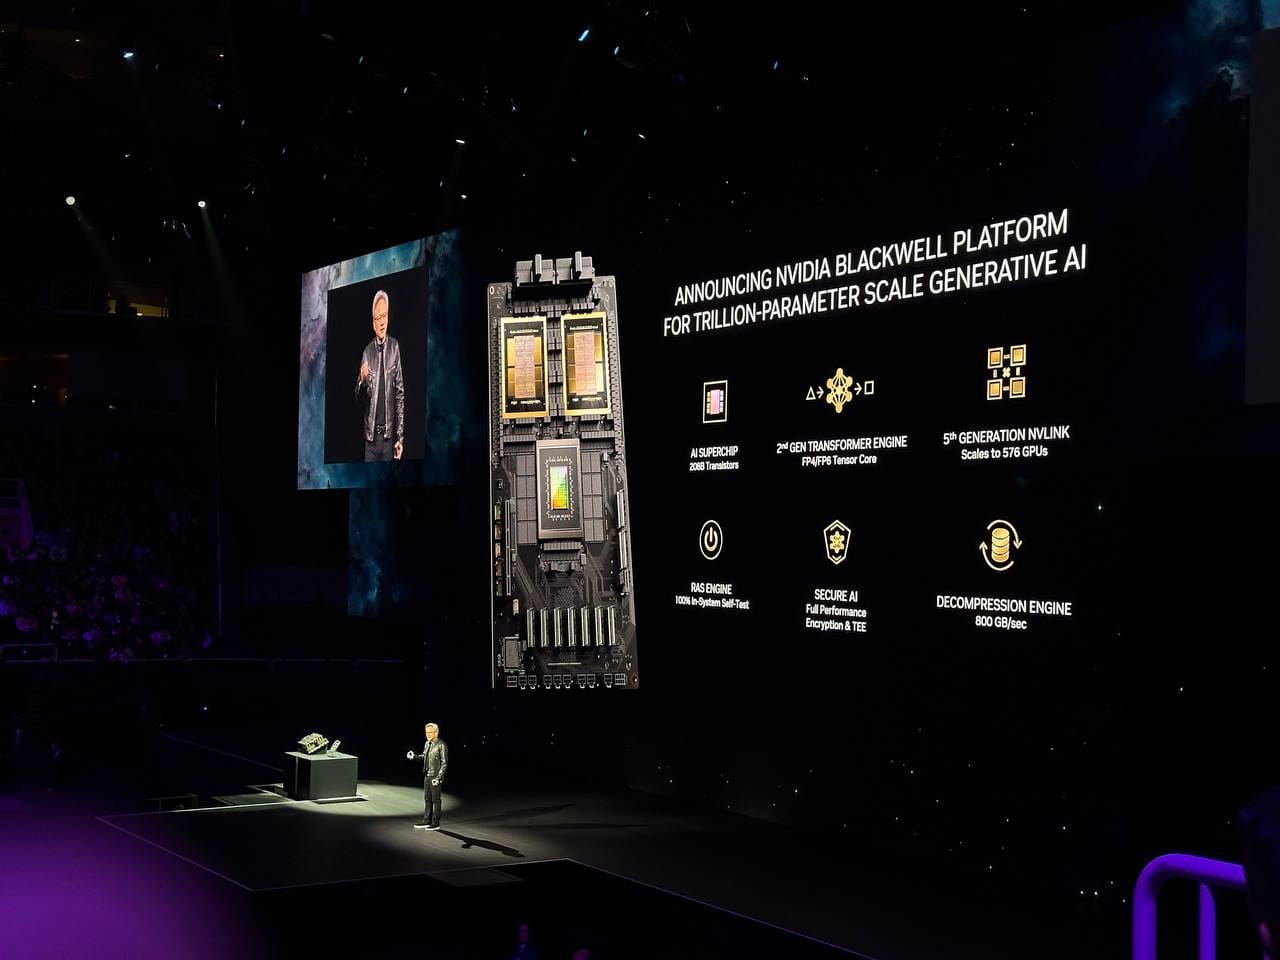 NVIDIA introduces the Blackwell architecture, a technology that will power "the new industrial revolution" post image